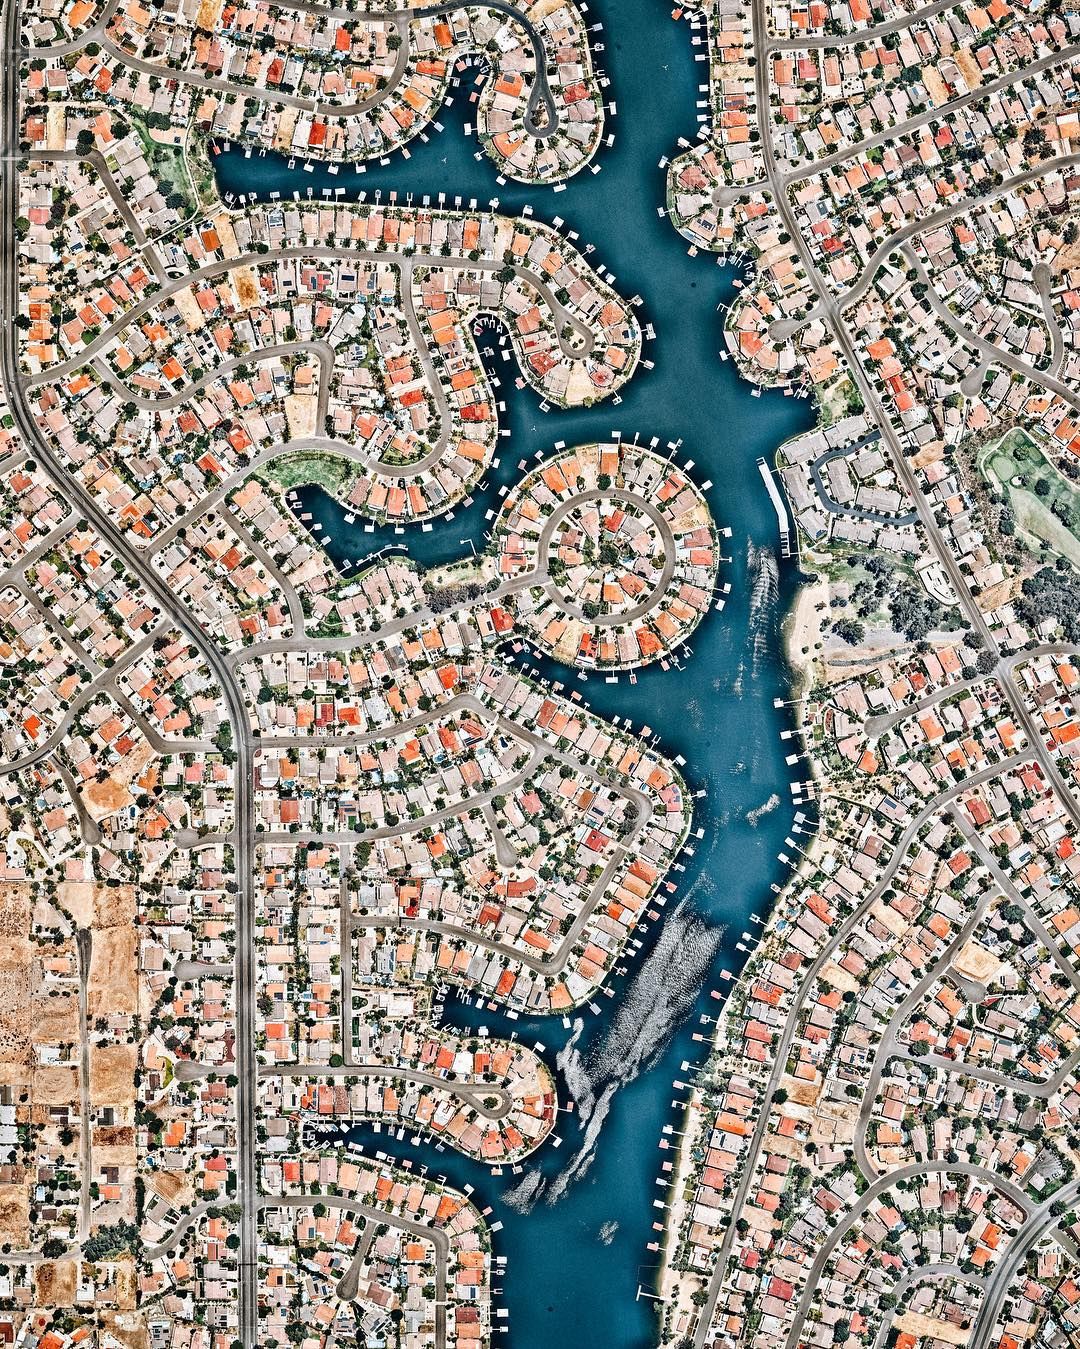 Daily Overview on Instagram: “Canyon Lake is a city and gated community in southern California, with a population of slightly more than 11,000 people. Constructed as a…”